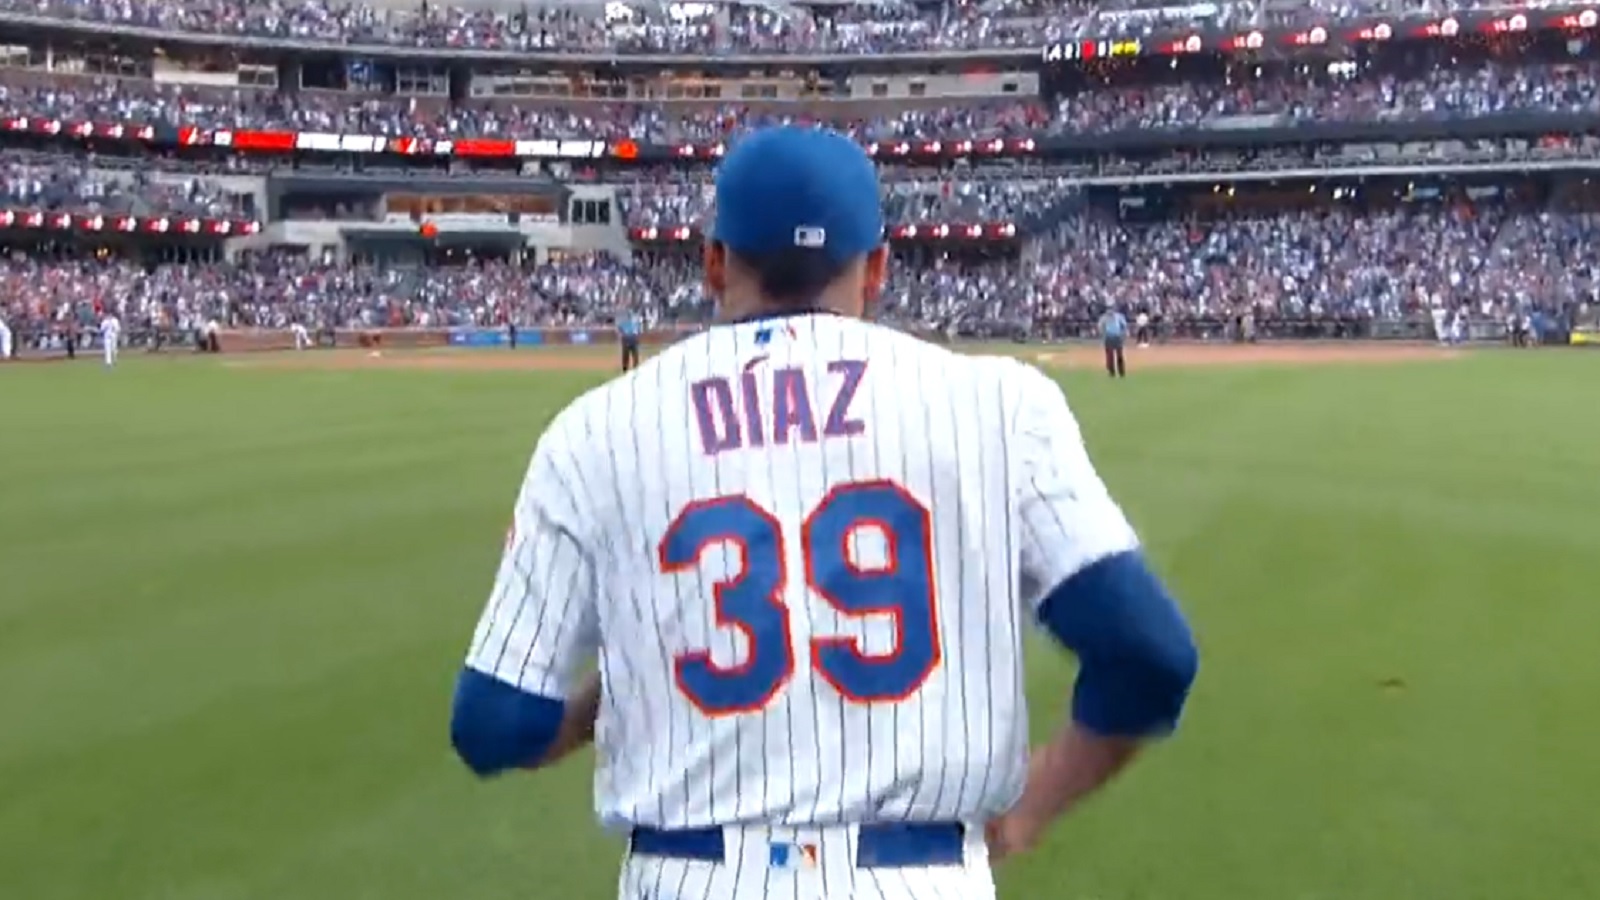 Team Puerto Rico honors Edwin Diaz with jersey in its bullpen - ESPN Video